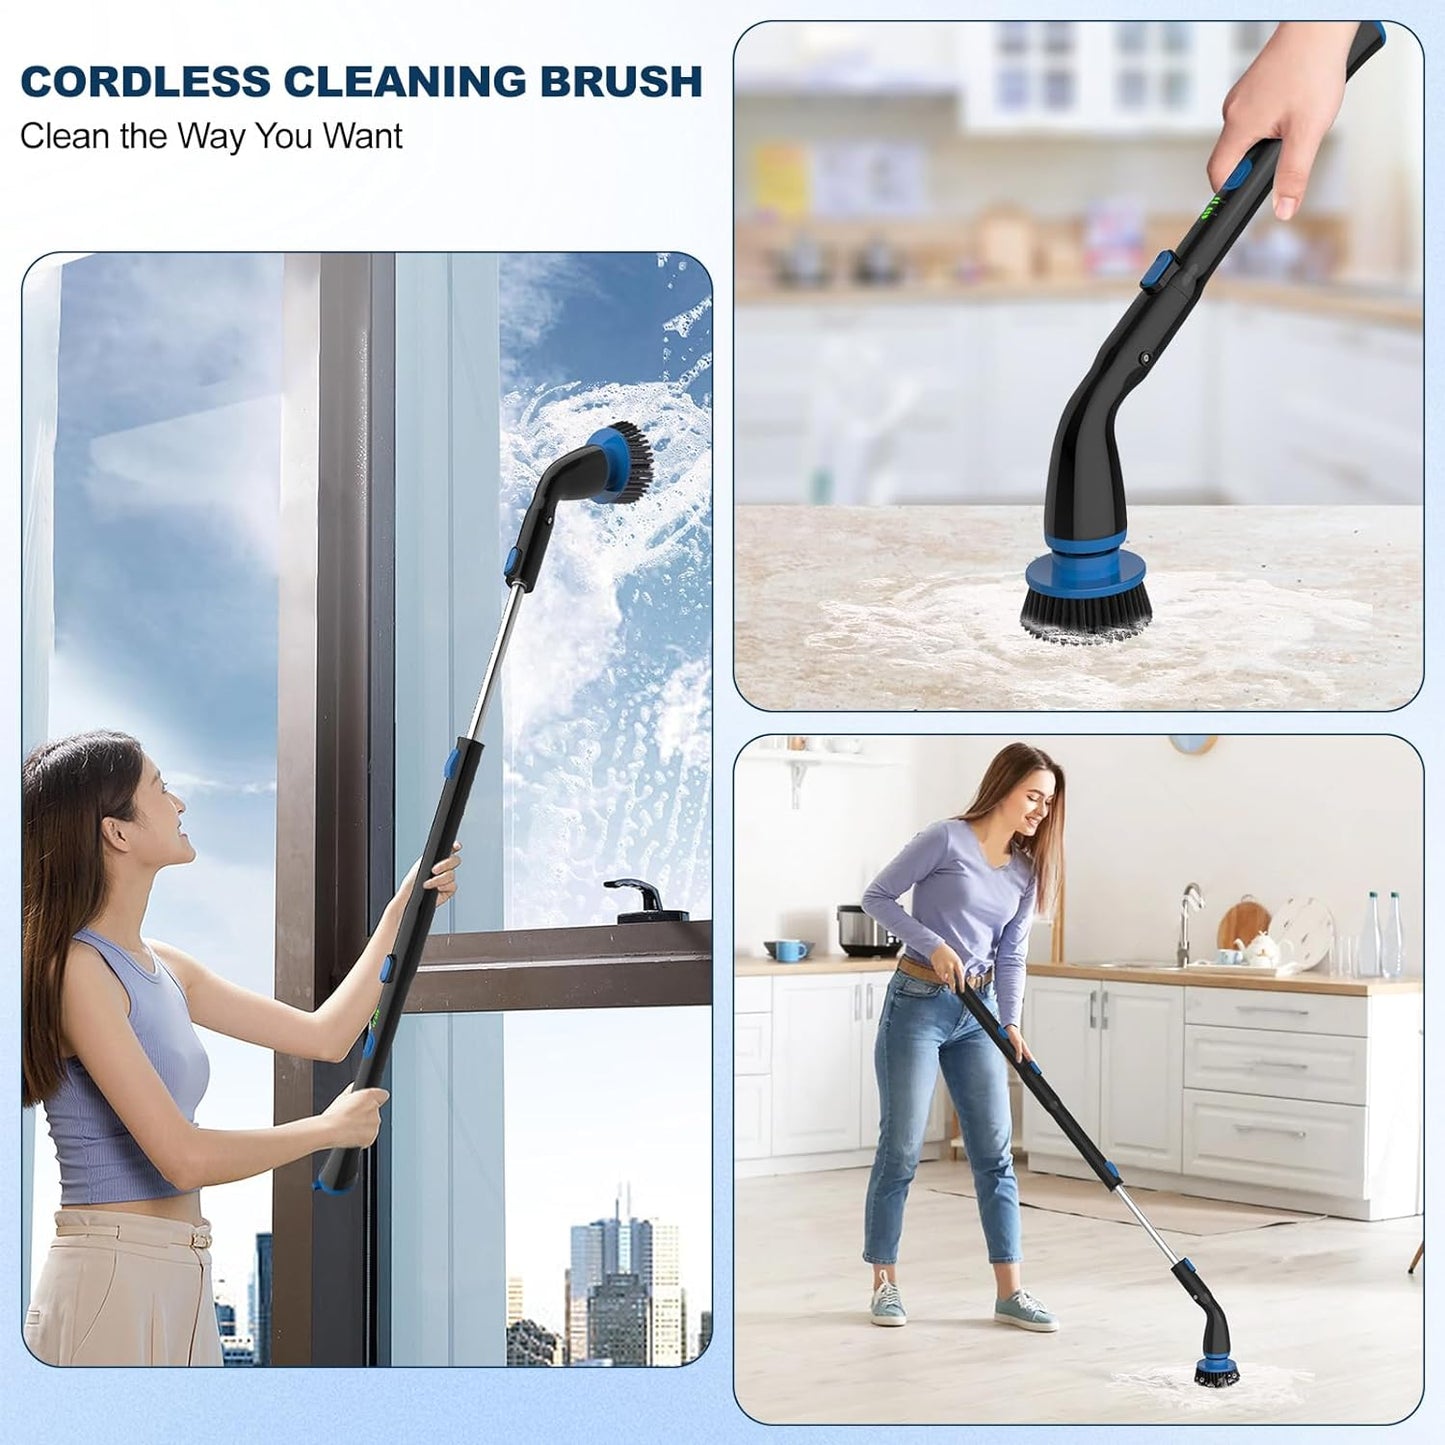 Electric Spin Scrubber, Cordless Cleaning Brush With 4 Replaceable Brush Heads And Adjustable Extension Handle Power Shower Scrubber For Bathroom, Kitchen, Tub, Tile, Floor.